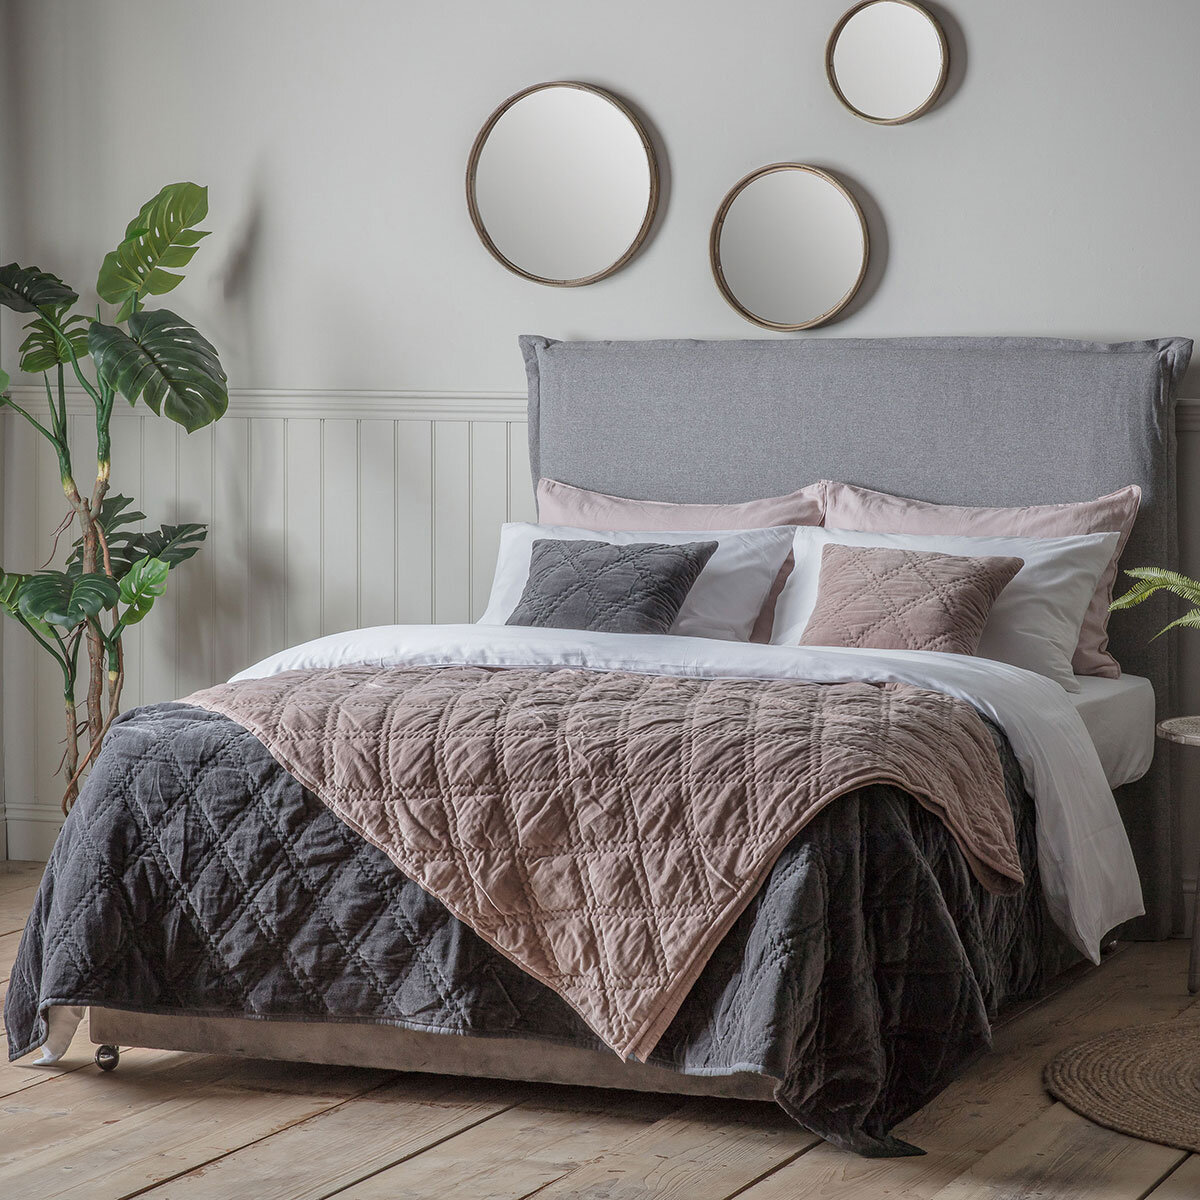 Gallery Quilted Velvet Cushion in Blush